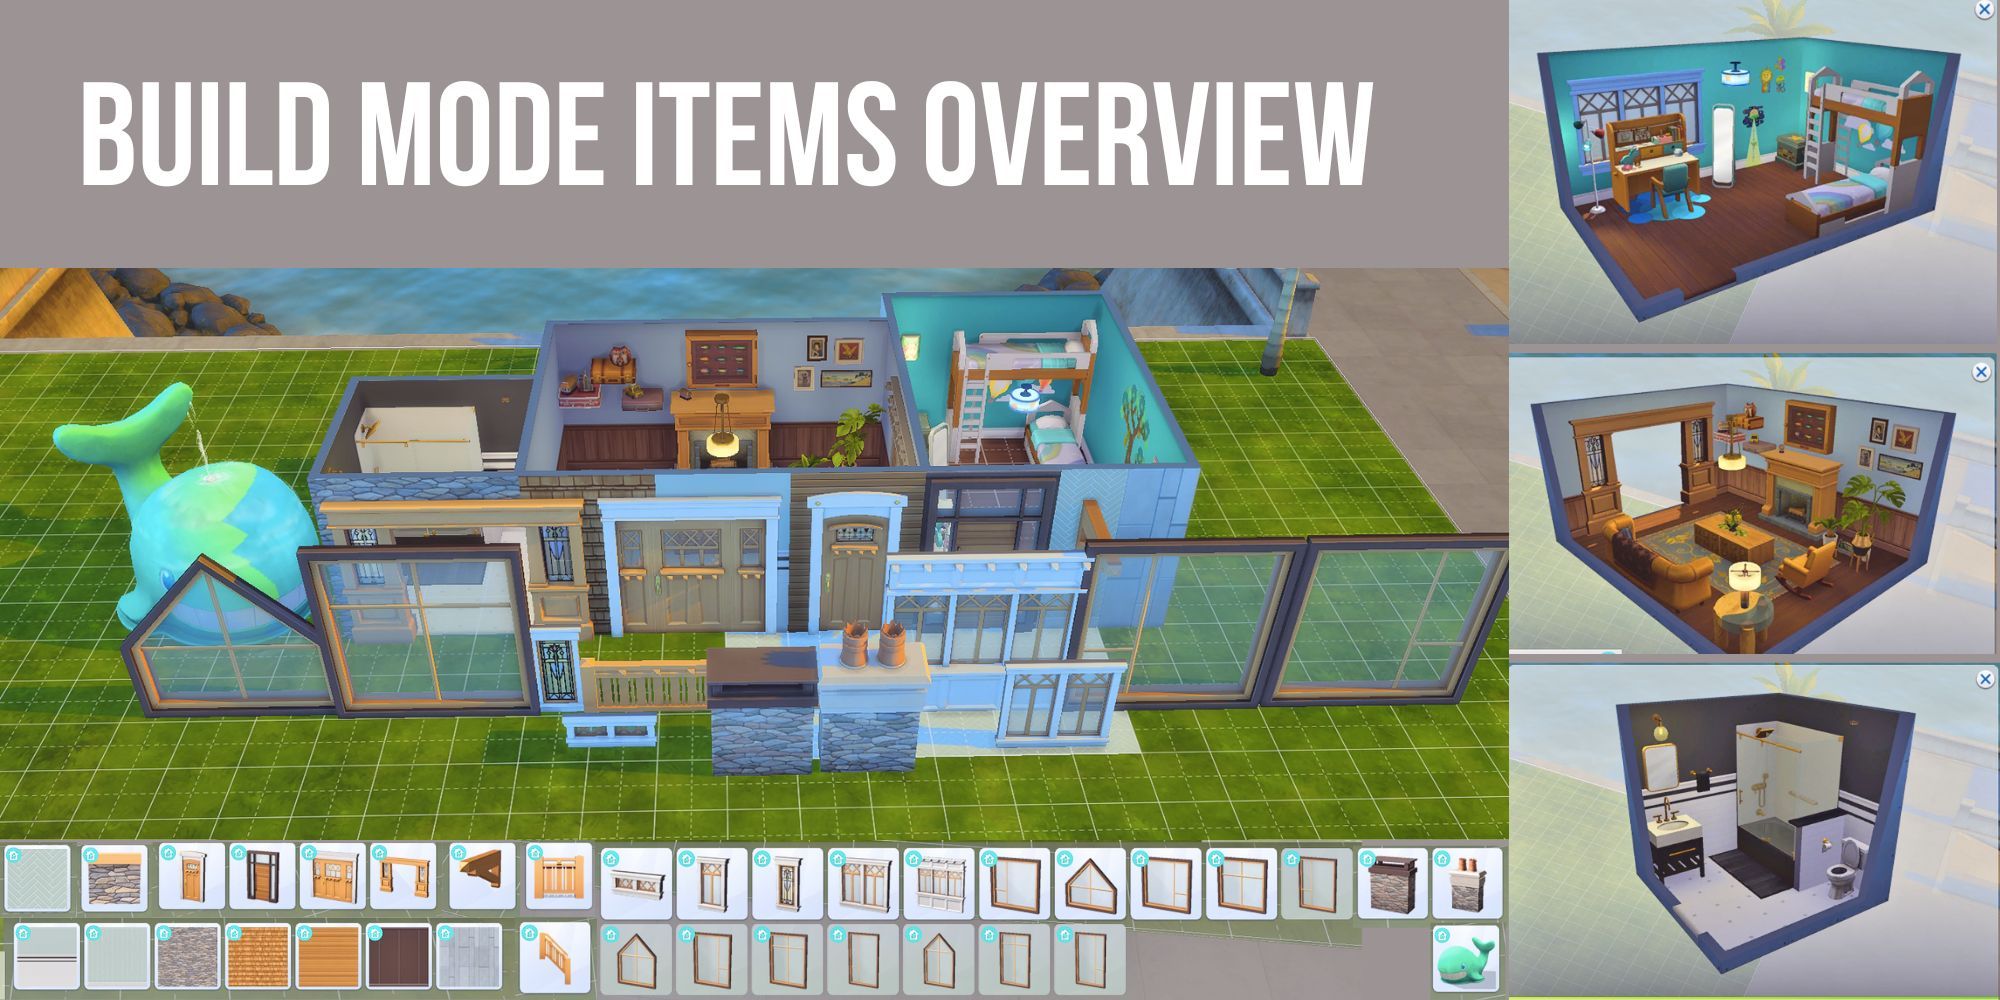 The Sims 4 Growing Together Build Mode Items Overview